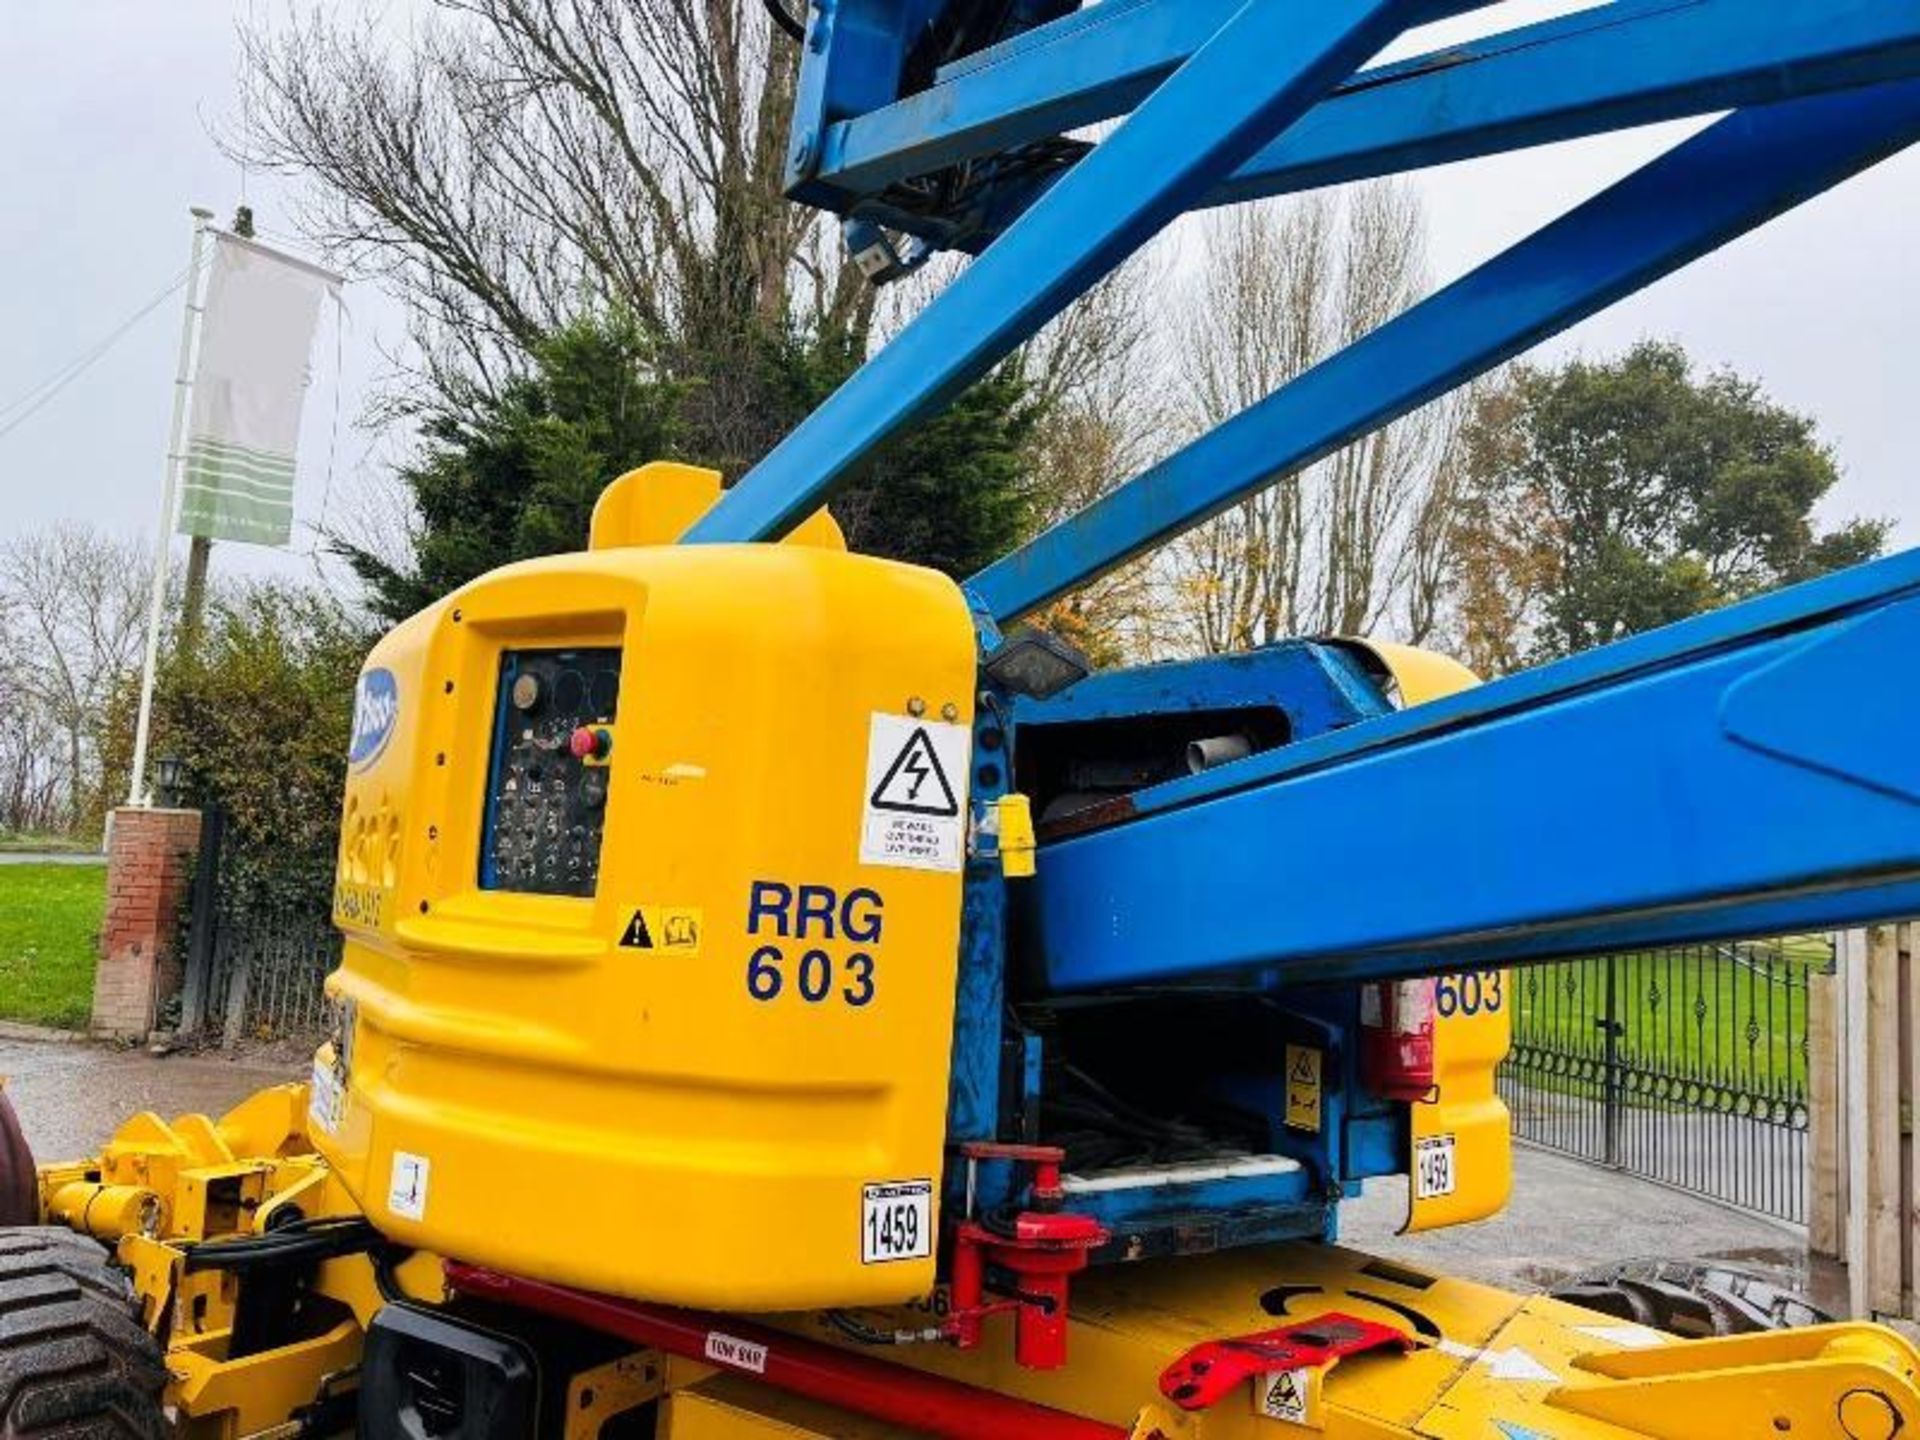 GENIE Z-60/34 4WD ARTICULATED RAIL ROAD BOOM LIFT *20.3 METERS* REMOTE CONTROL DRIVE - Image 2 of 15